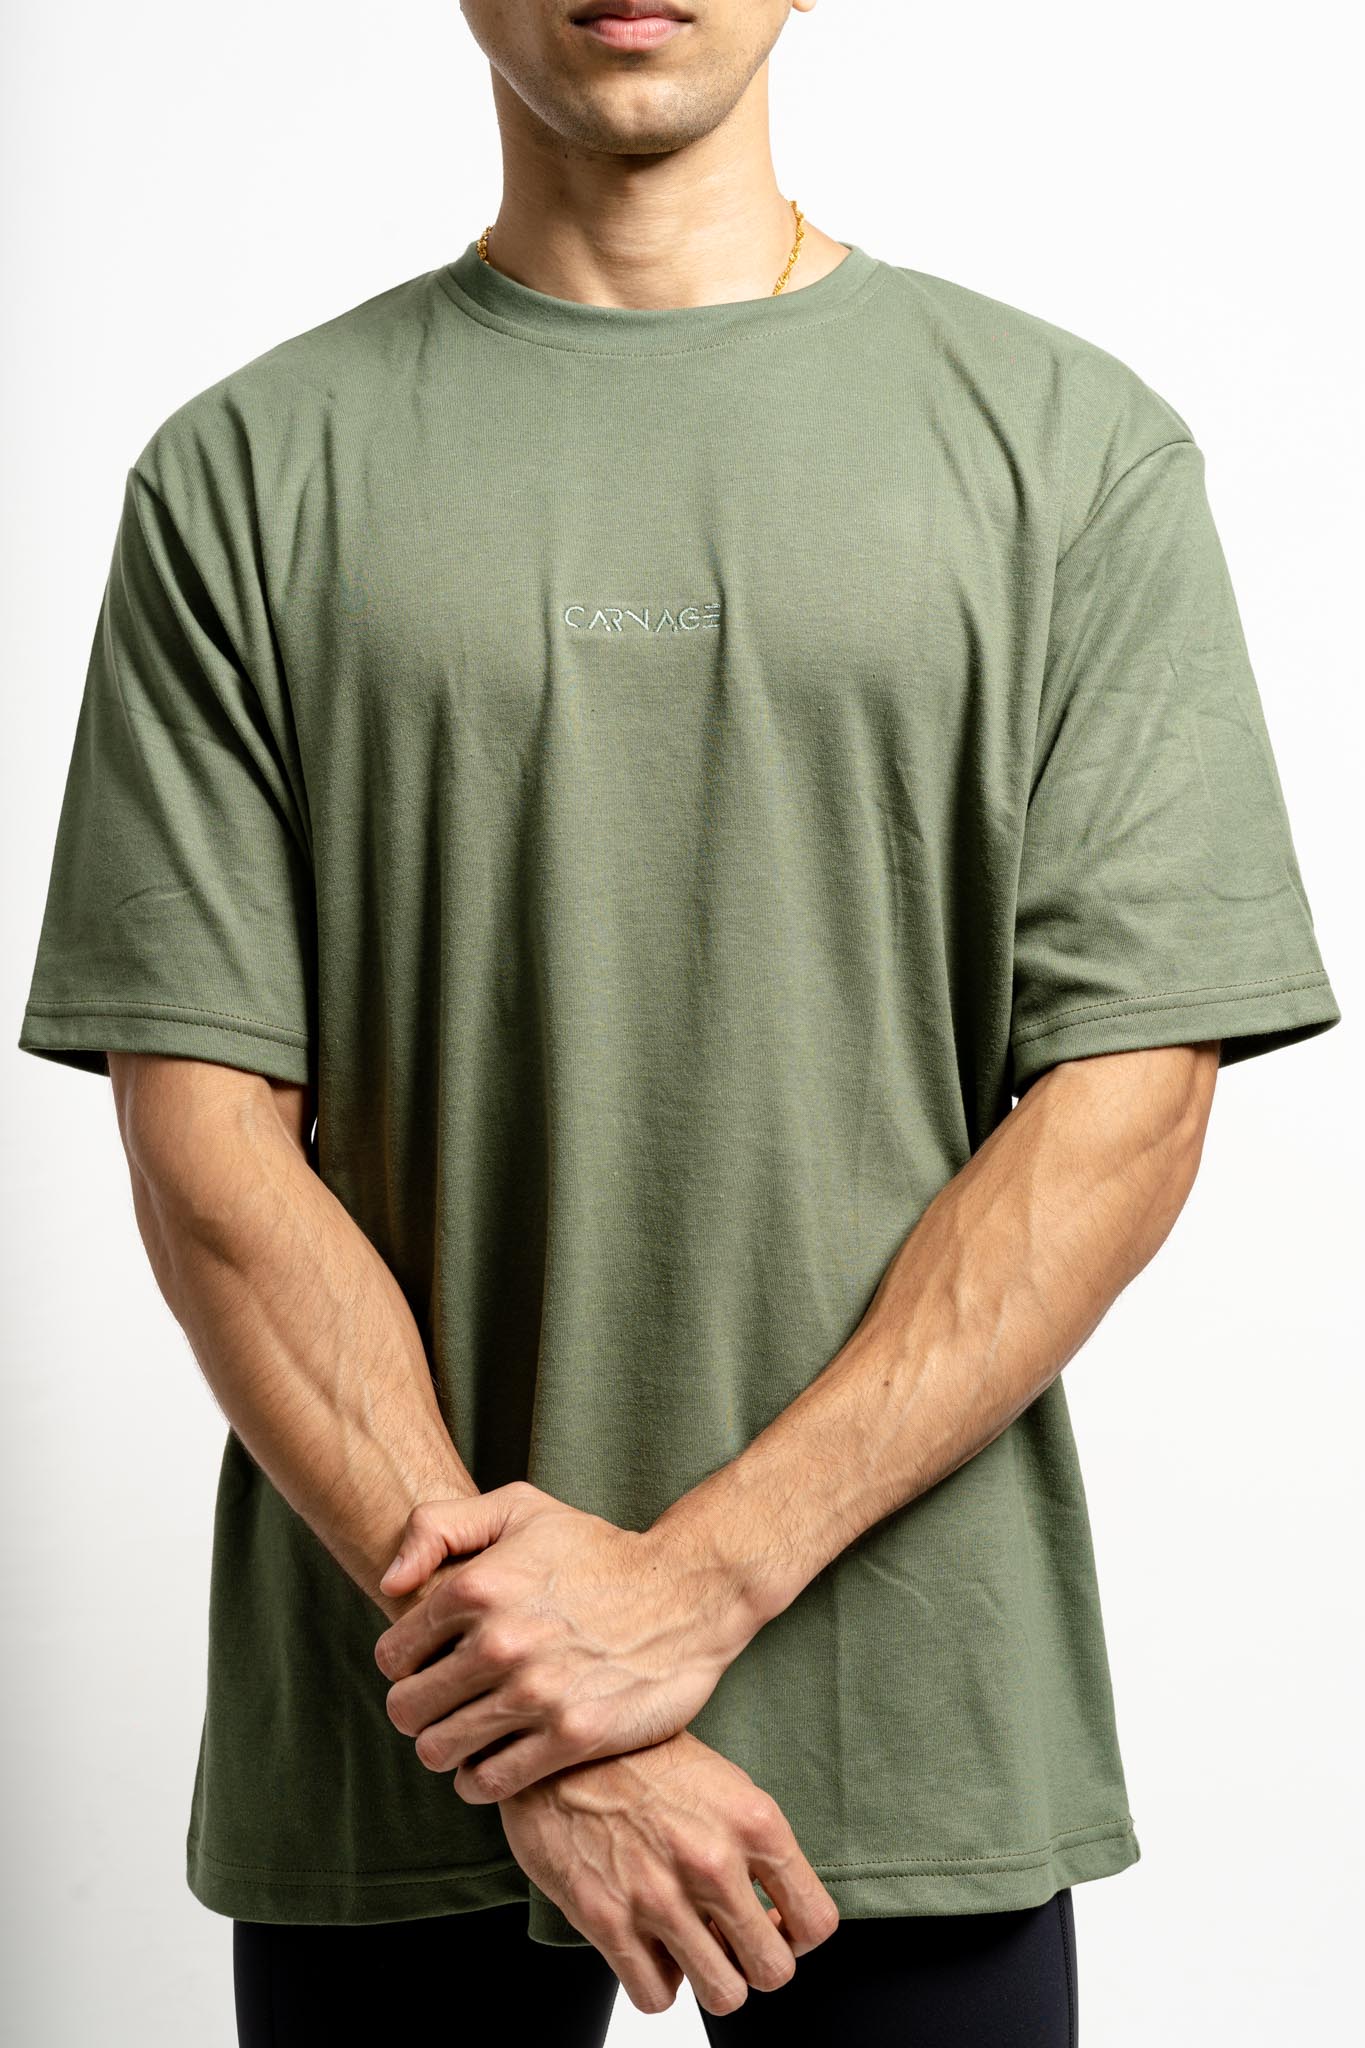 Carnage Desire Oversize Tee 2.0 - Forest Green - Unisex